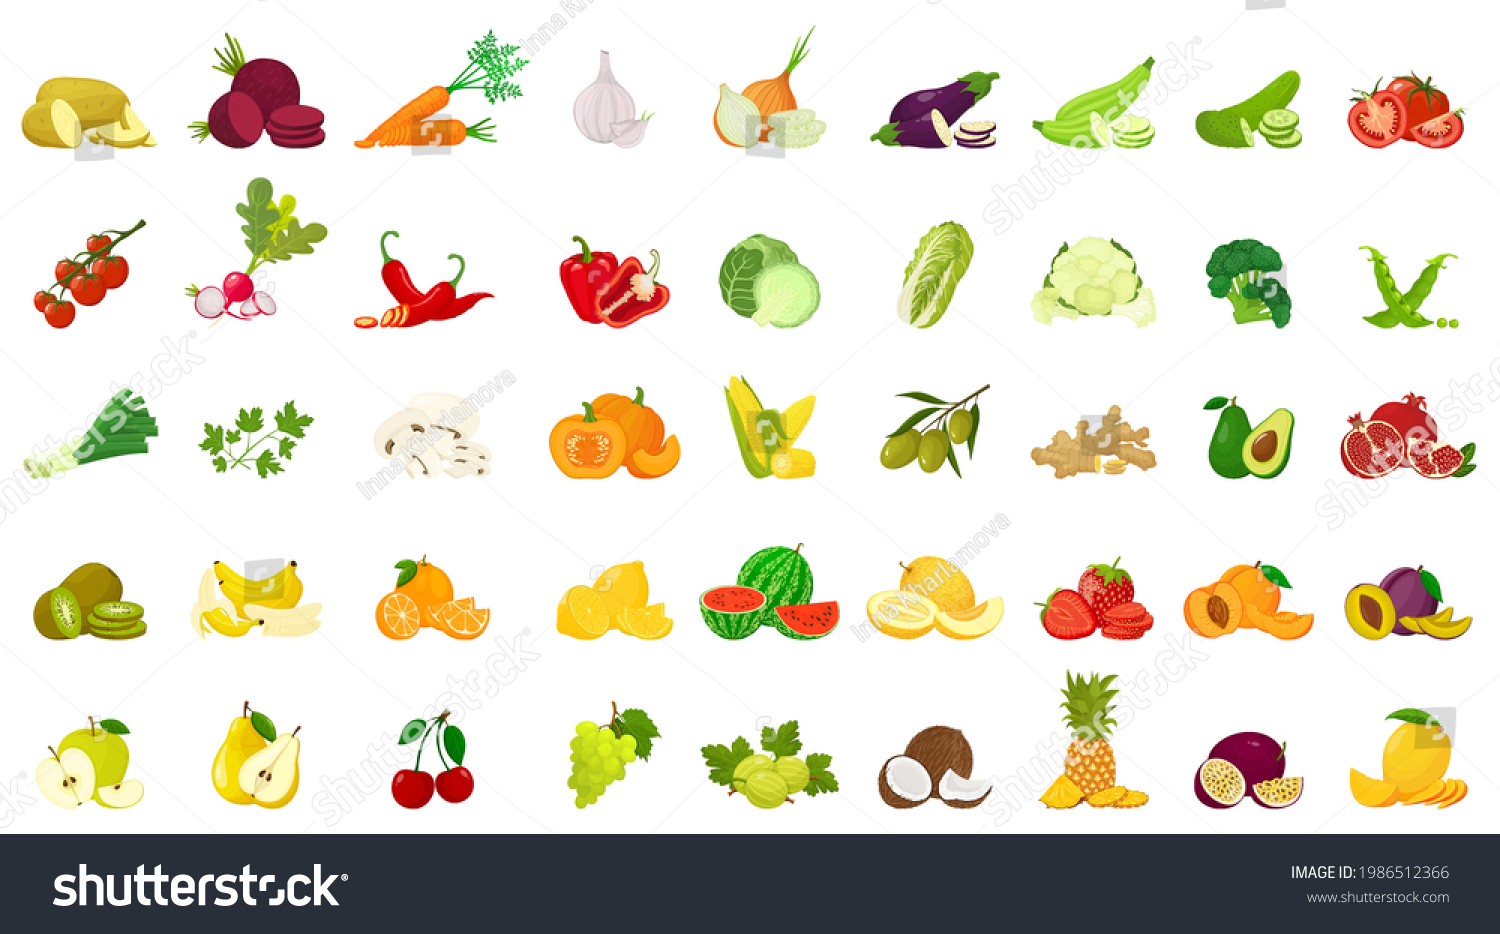 Set of fruits and vegetables, colorful vector icons in flat style, isolated Graphic design elements, collection of illustrations for websites, mobile applications, web banners, infographics, printed m #1986512366